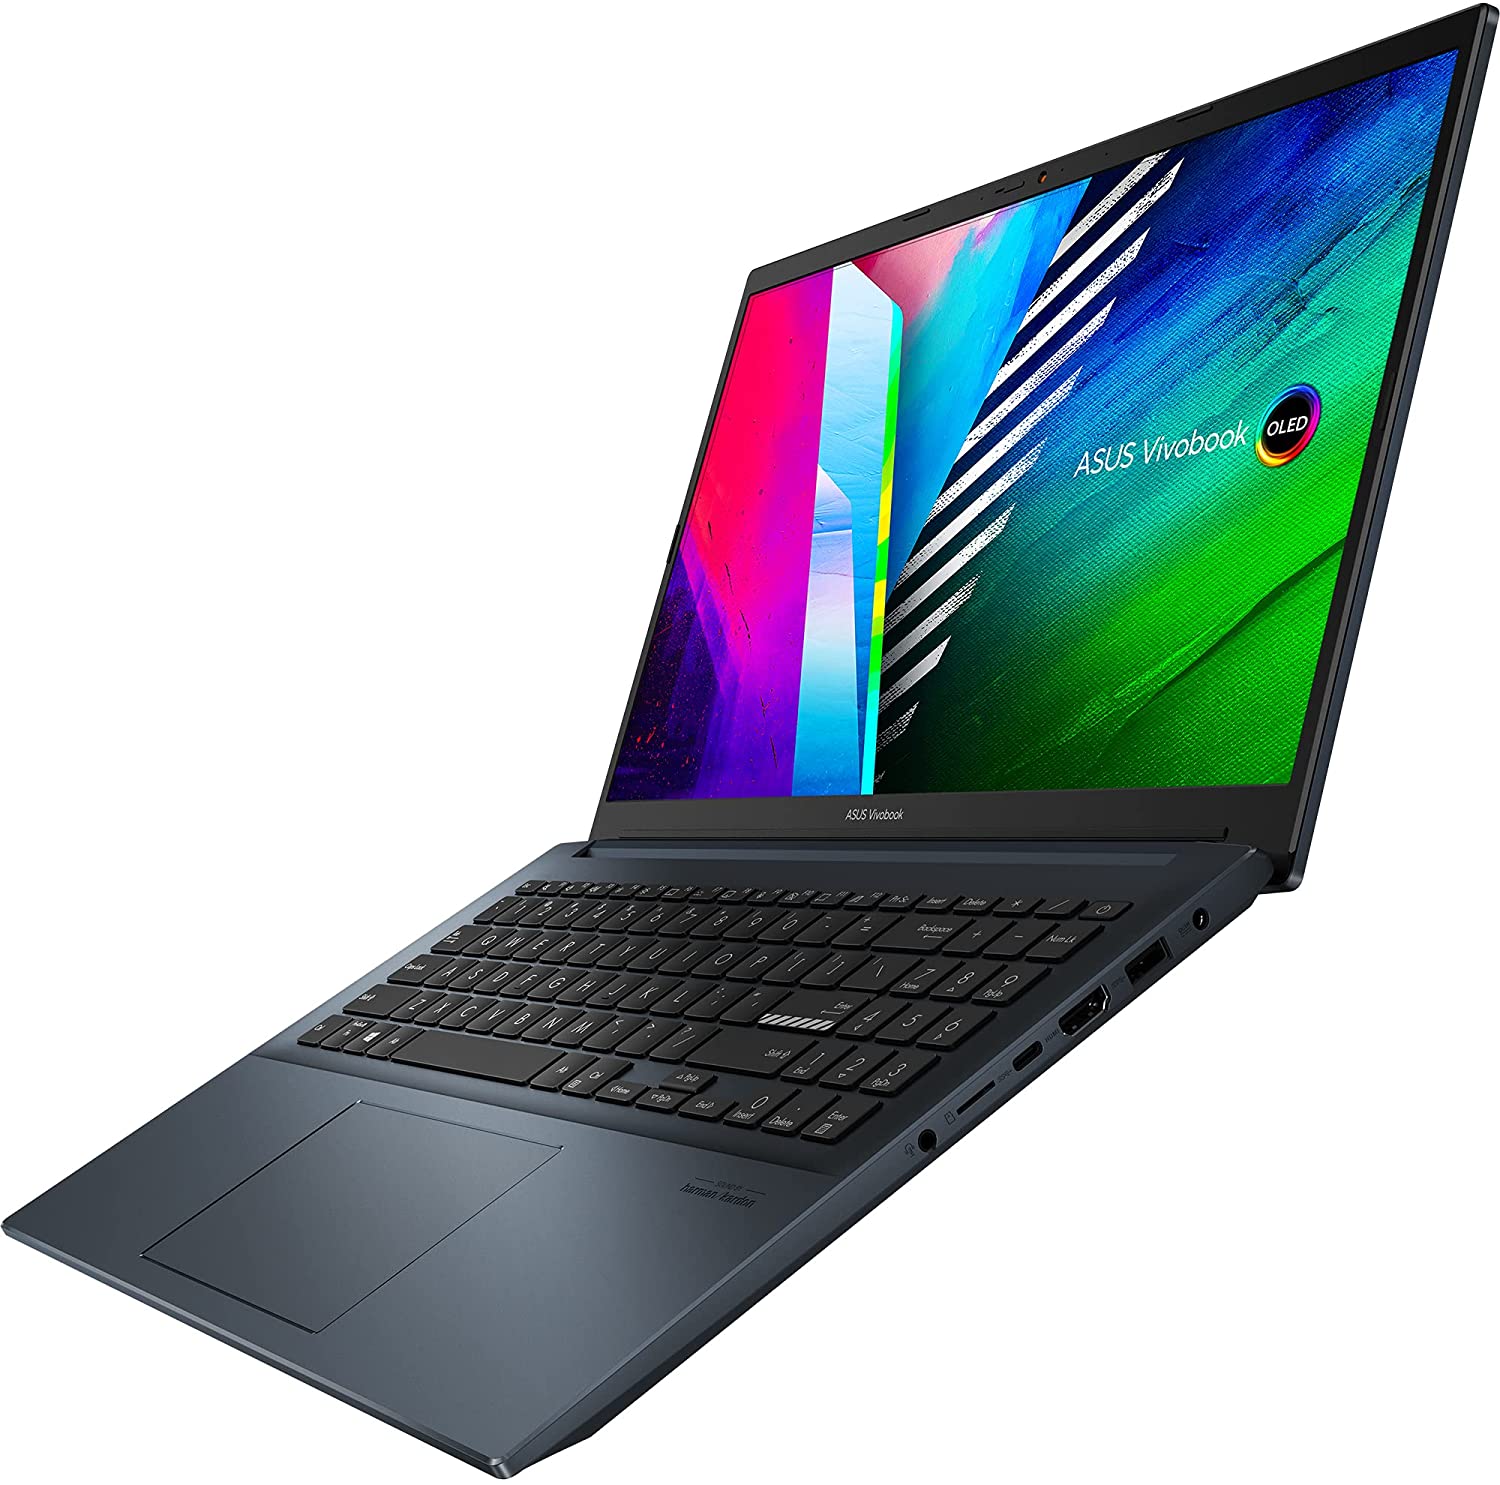 Asus VivoBook Pro 15 OLED: 15.6" FHD OLED, Ryzen 7 5800H, RTX 3050, 16GB DDR4, 512GB PCIe SSD, Win10H @ $1099.99 + F/S